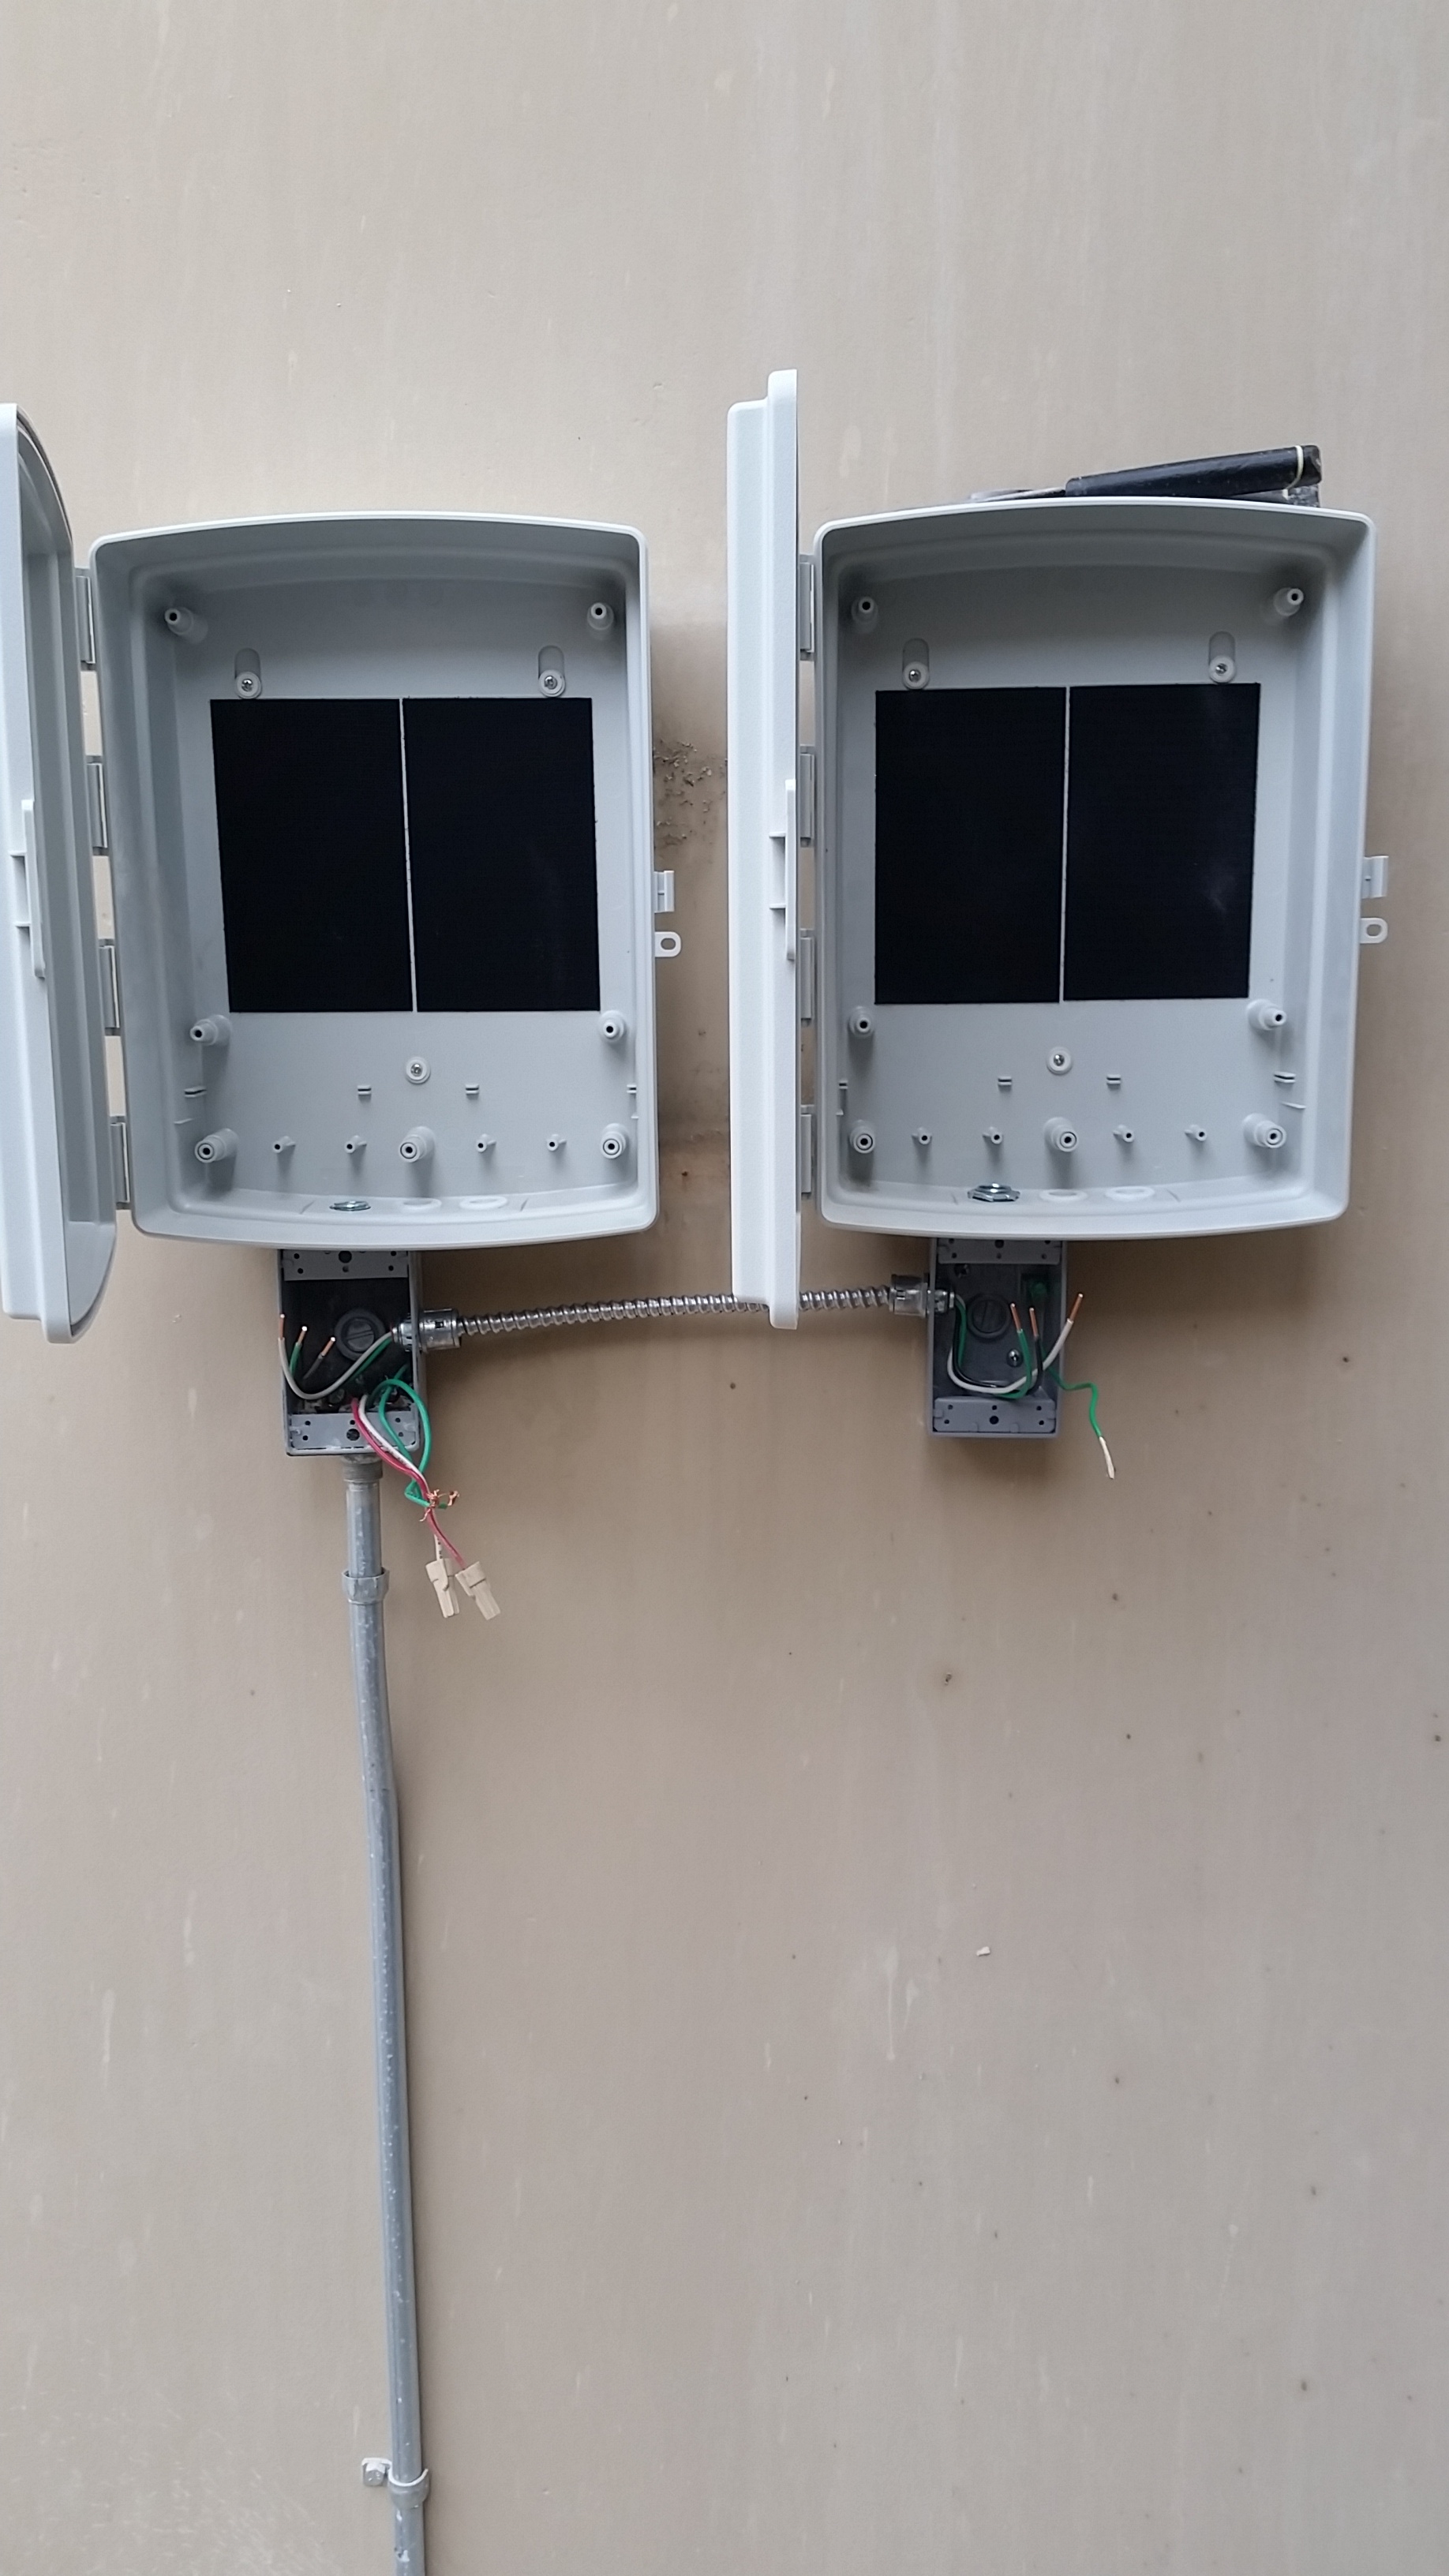 first-rachio-to-be-installed-in-las-vegas-nv-at-a-commercial-complex